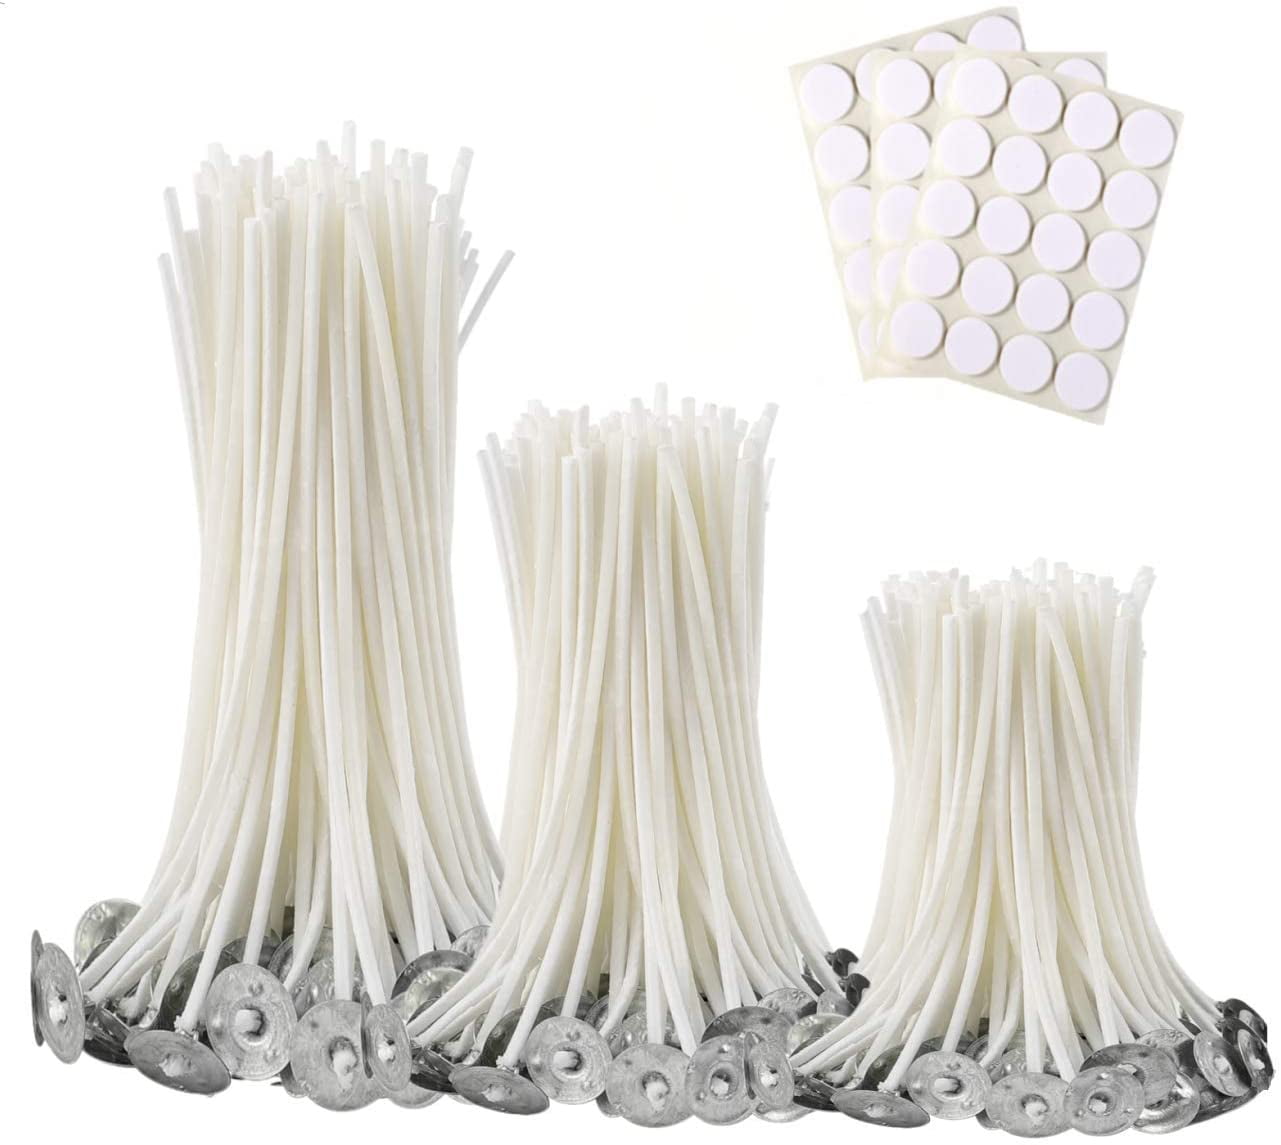 Pack of 100 15 cm Pre Waxed Wicks for Candle Making with Sustainers 